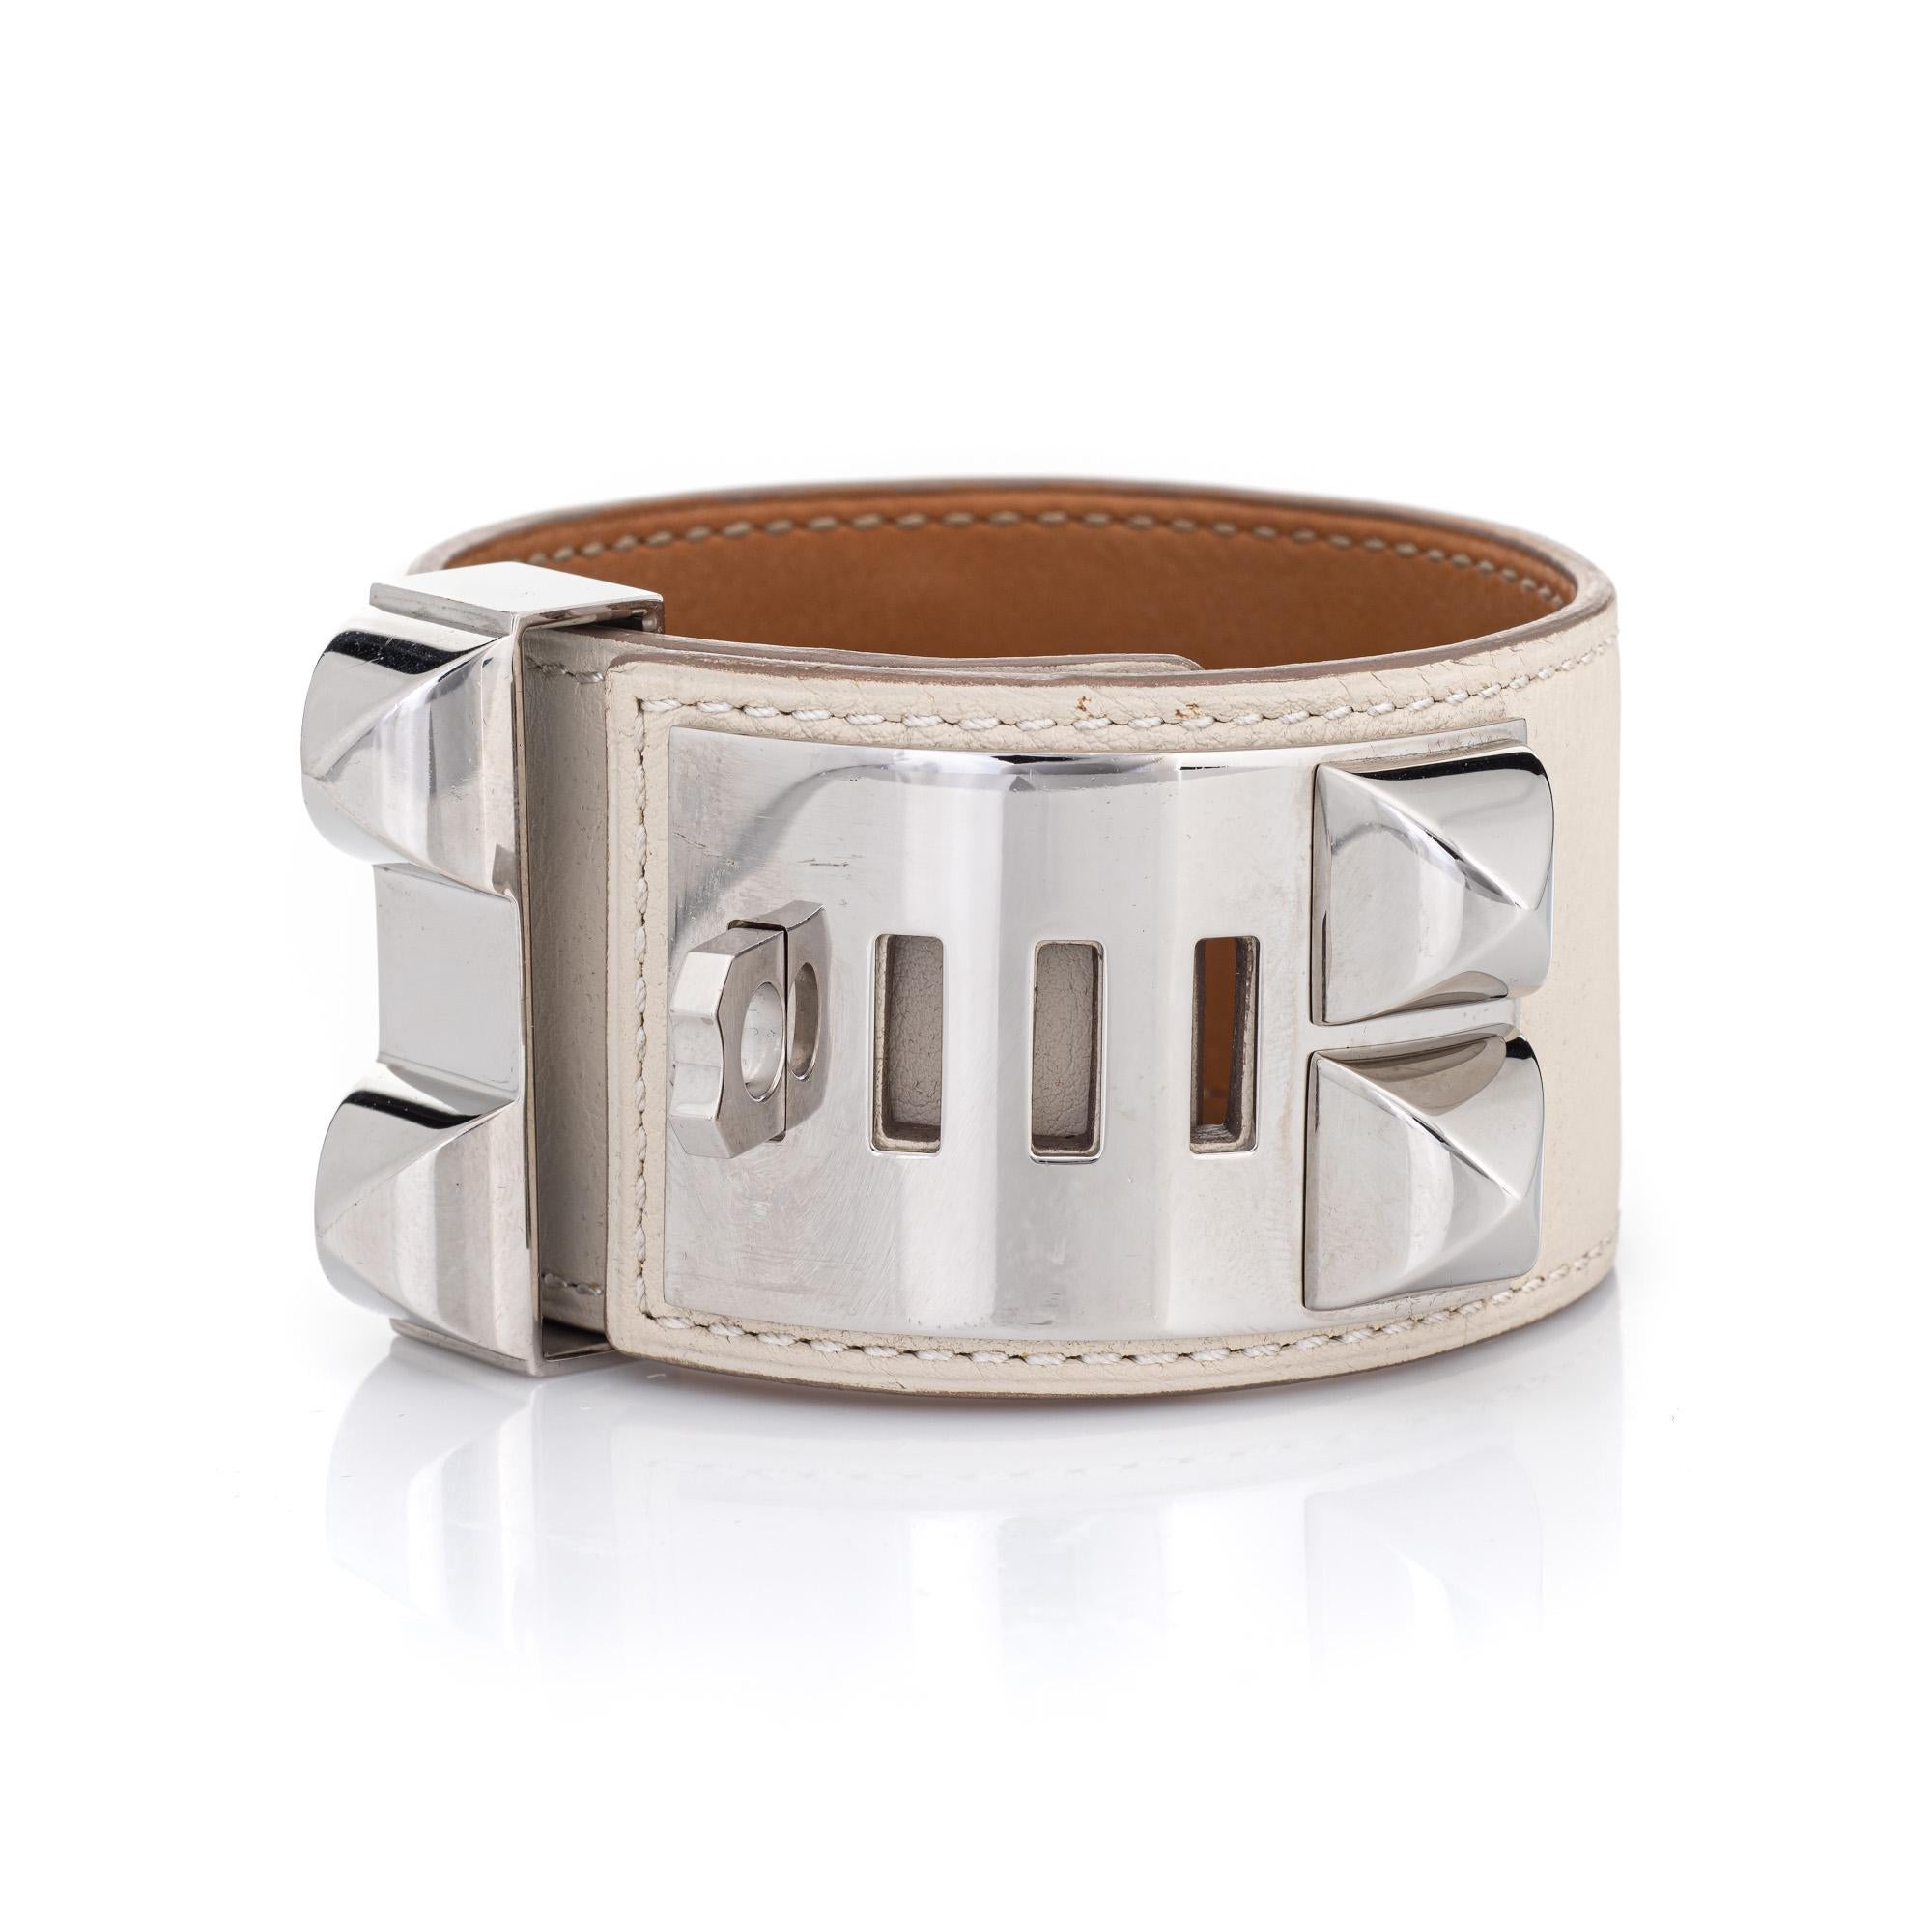 Overview:

Pre-owned Hermes Collier de Chien white leather cuff bracelet finished with palladium-plated hardware. Also included is the Hermes brown felt travel pouch. 

The wide 1.50-inch bracelet features an adjustable length from 7 inches to 8